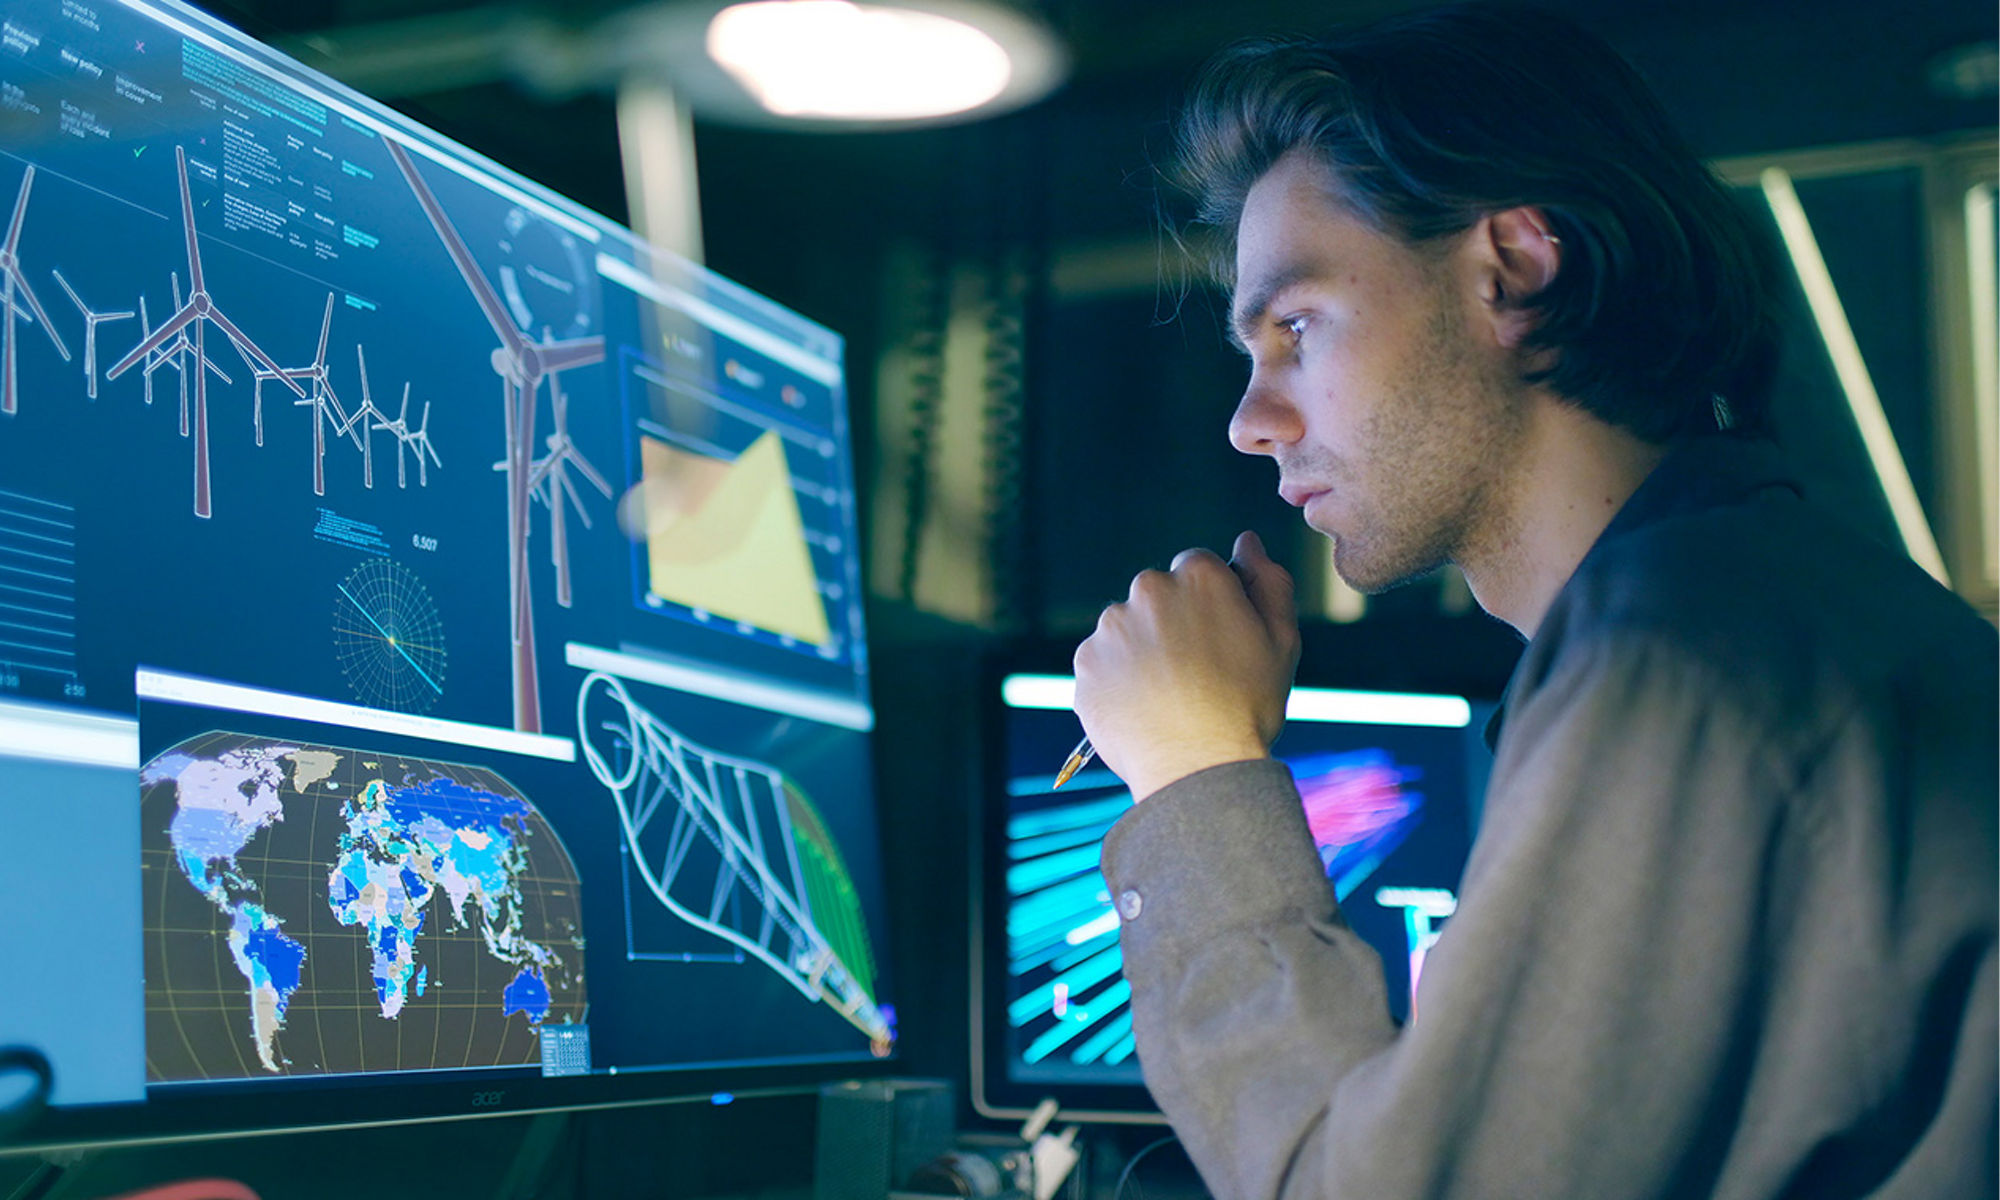 Stock image of a young, long-haired man, working at night in front of a large computer screen showing designs for a wind turbine